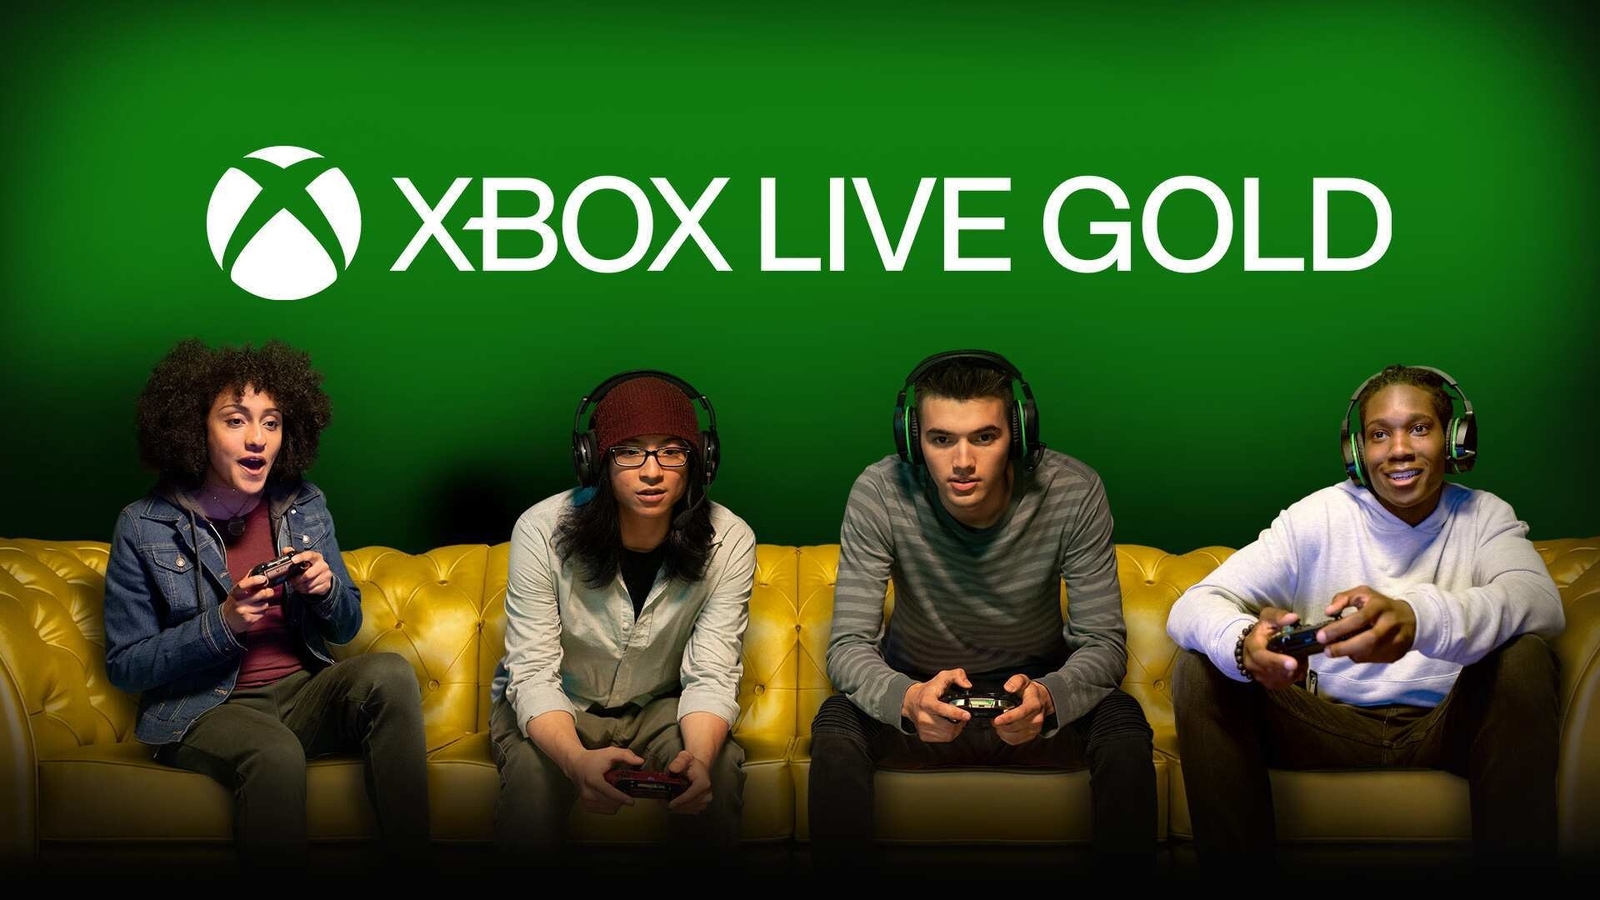 Xbox Live Gold prices won’t increase, announced Microsoft after gamers